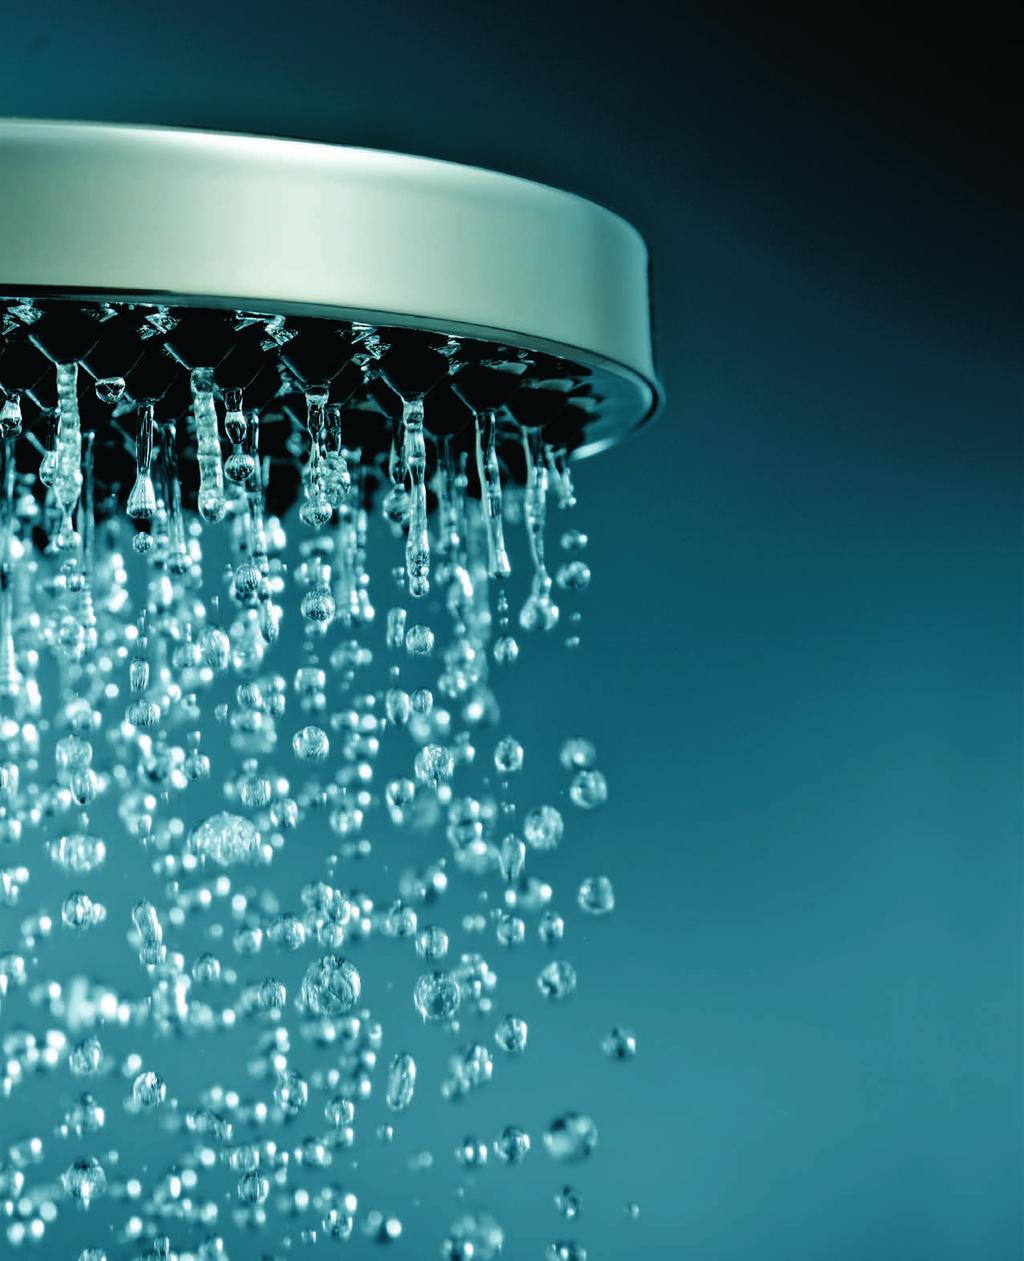 SHOWERS THE NOW RANGE OF SHOWERS HAS BEEN CREATED TO ENSURE THAT DESIGN AND QUALITY ARE BALANCED WITH TECHNICAL EXCELLENCE SO THAT EACH SHOWER WILL GIVE OPTIMUM PERFORMANCE, TEMPERATURE CONTROL AND